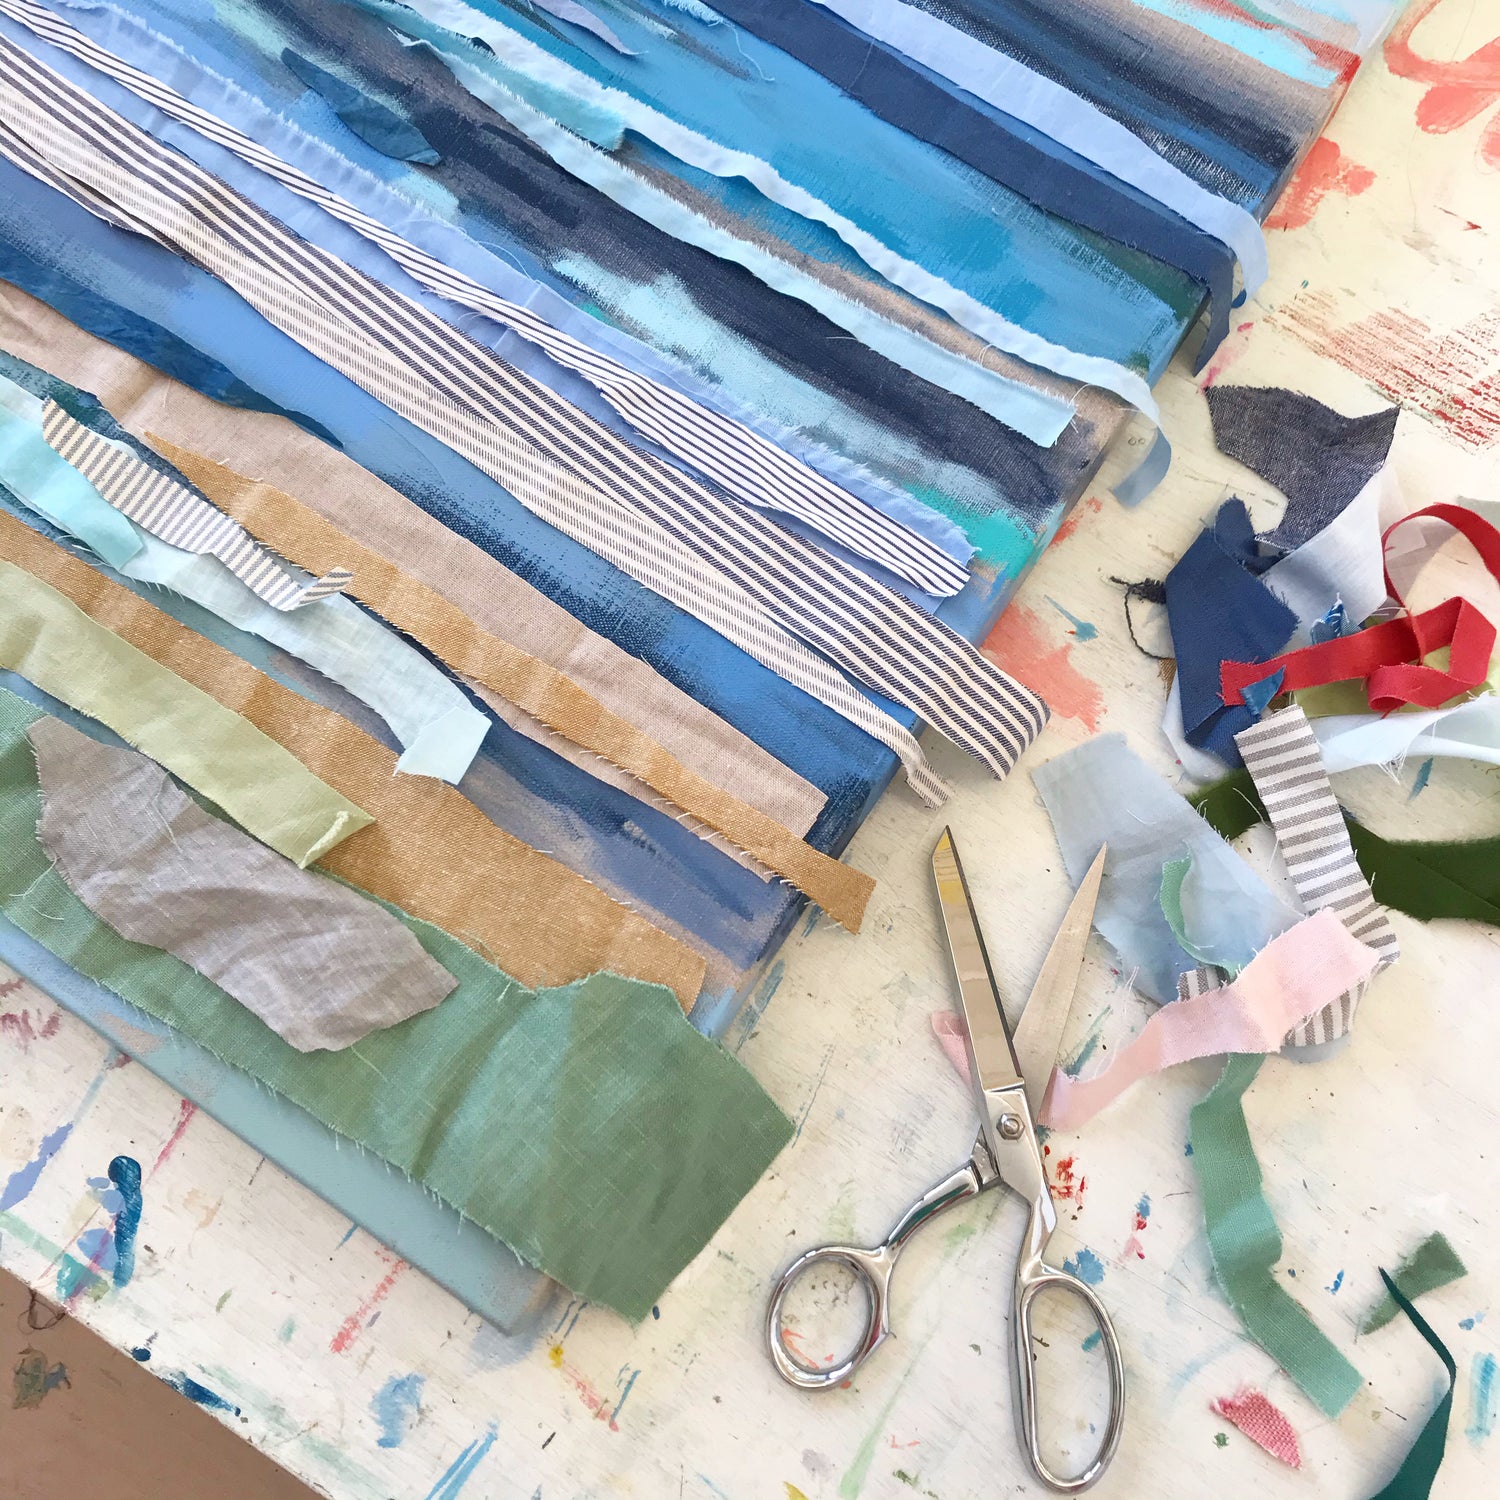 Fabric Layered Coastal Abstract Painting by Karin Olah, Work in progress